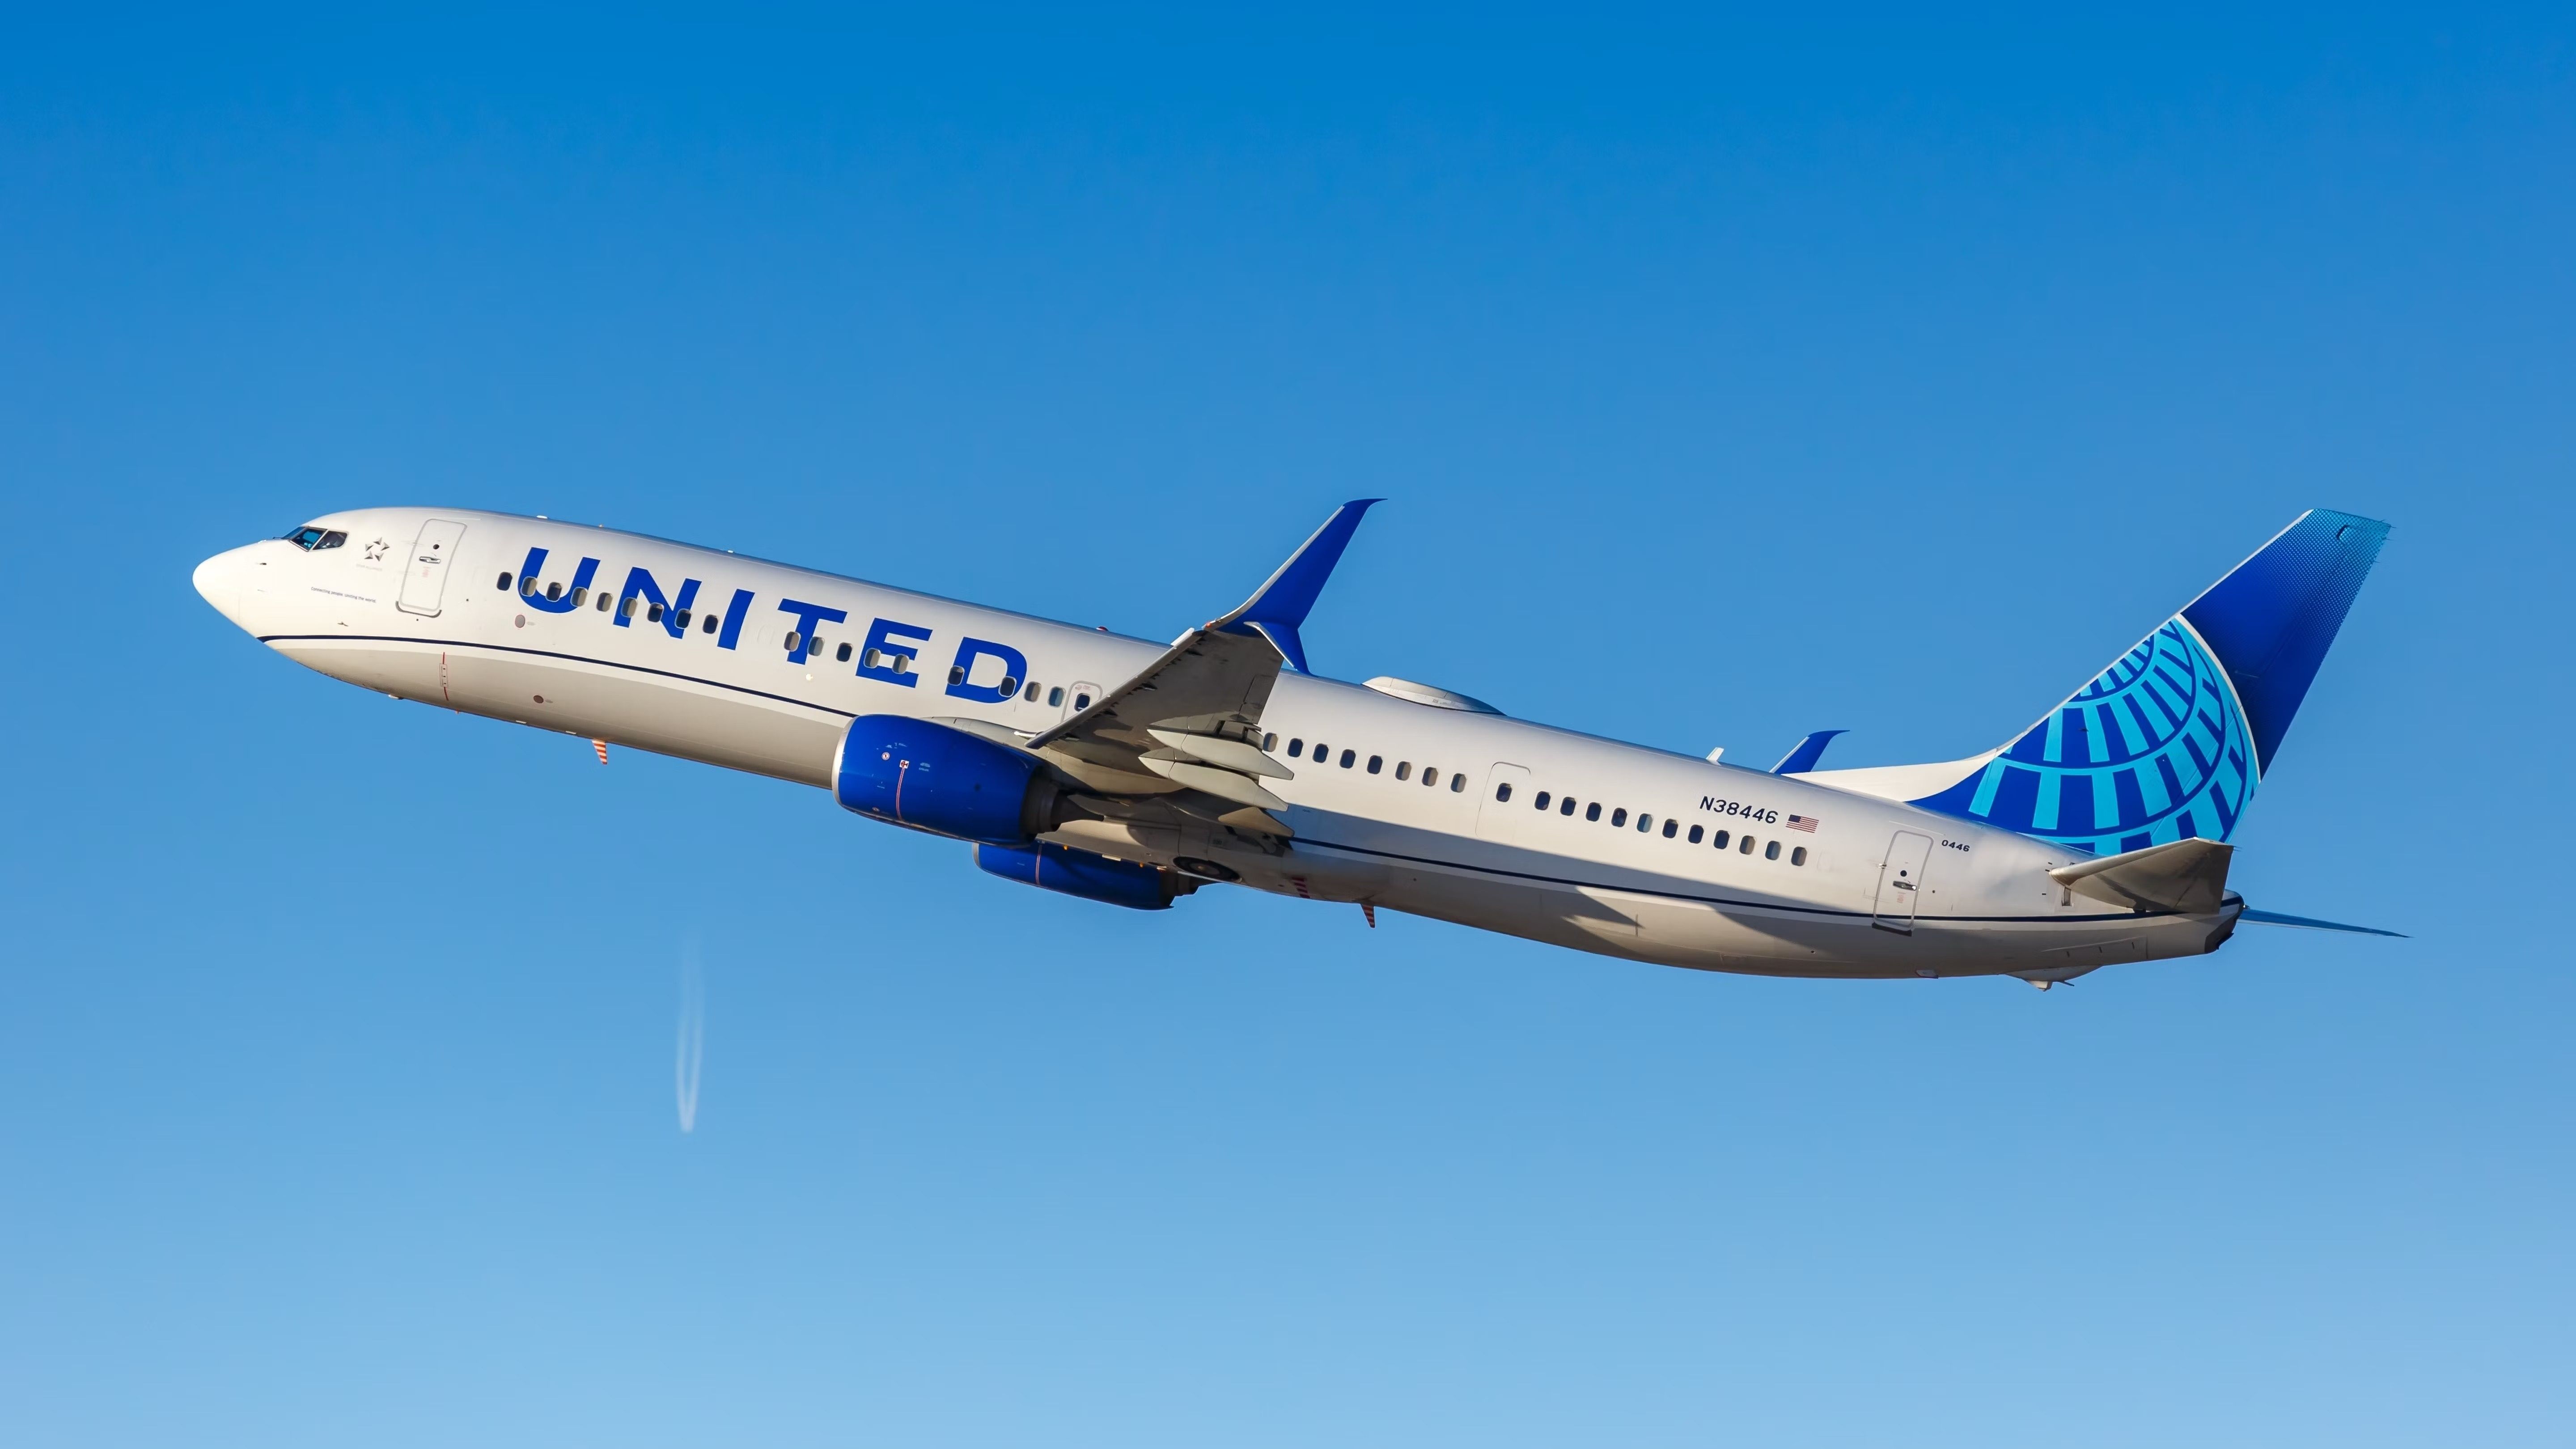 A United Airlines 737-900ER flying in the sky.